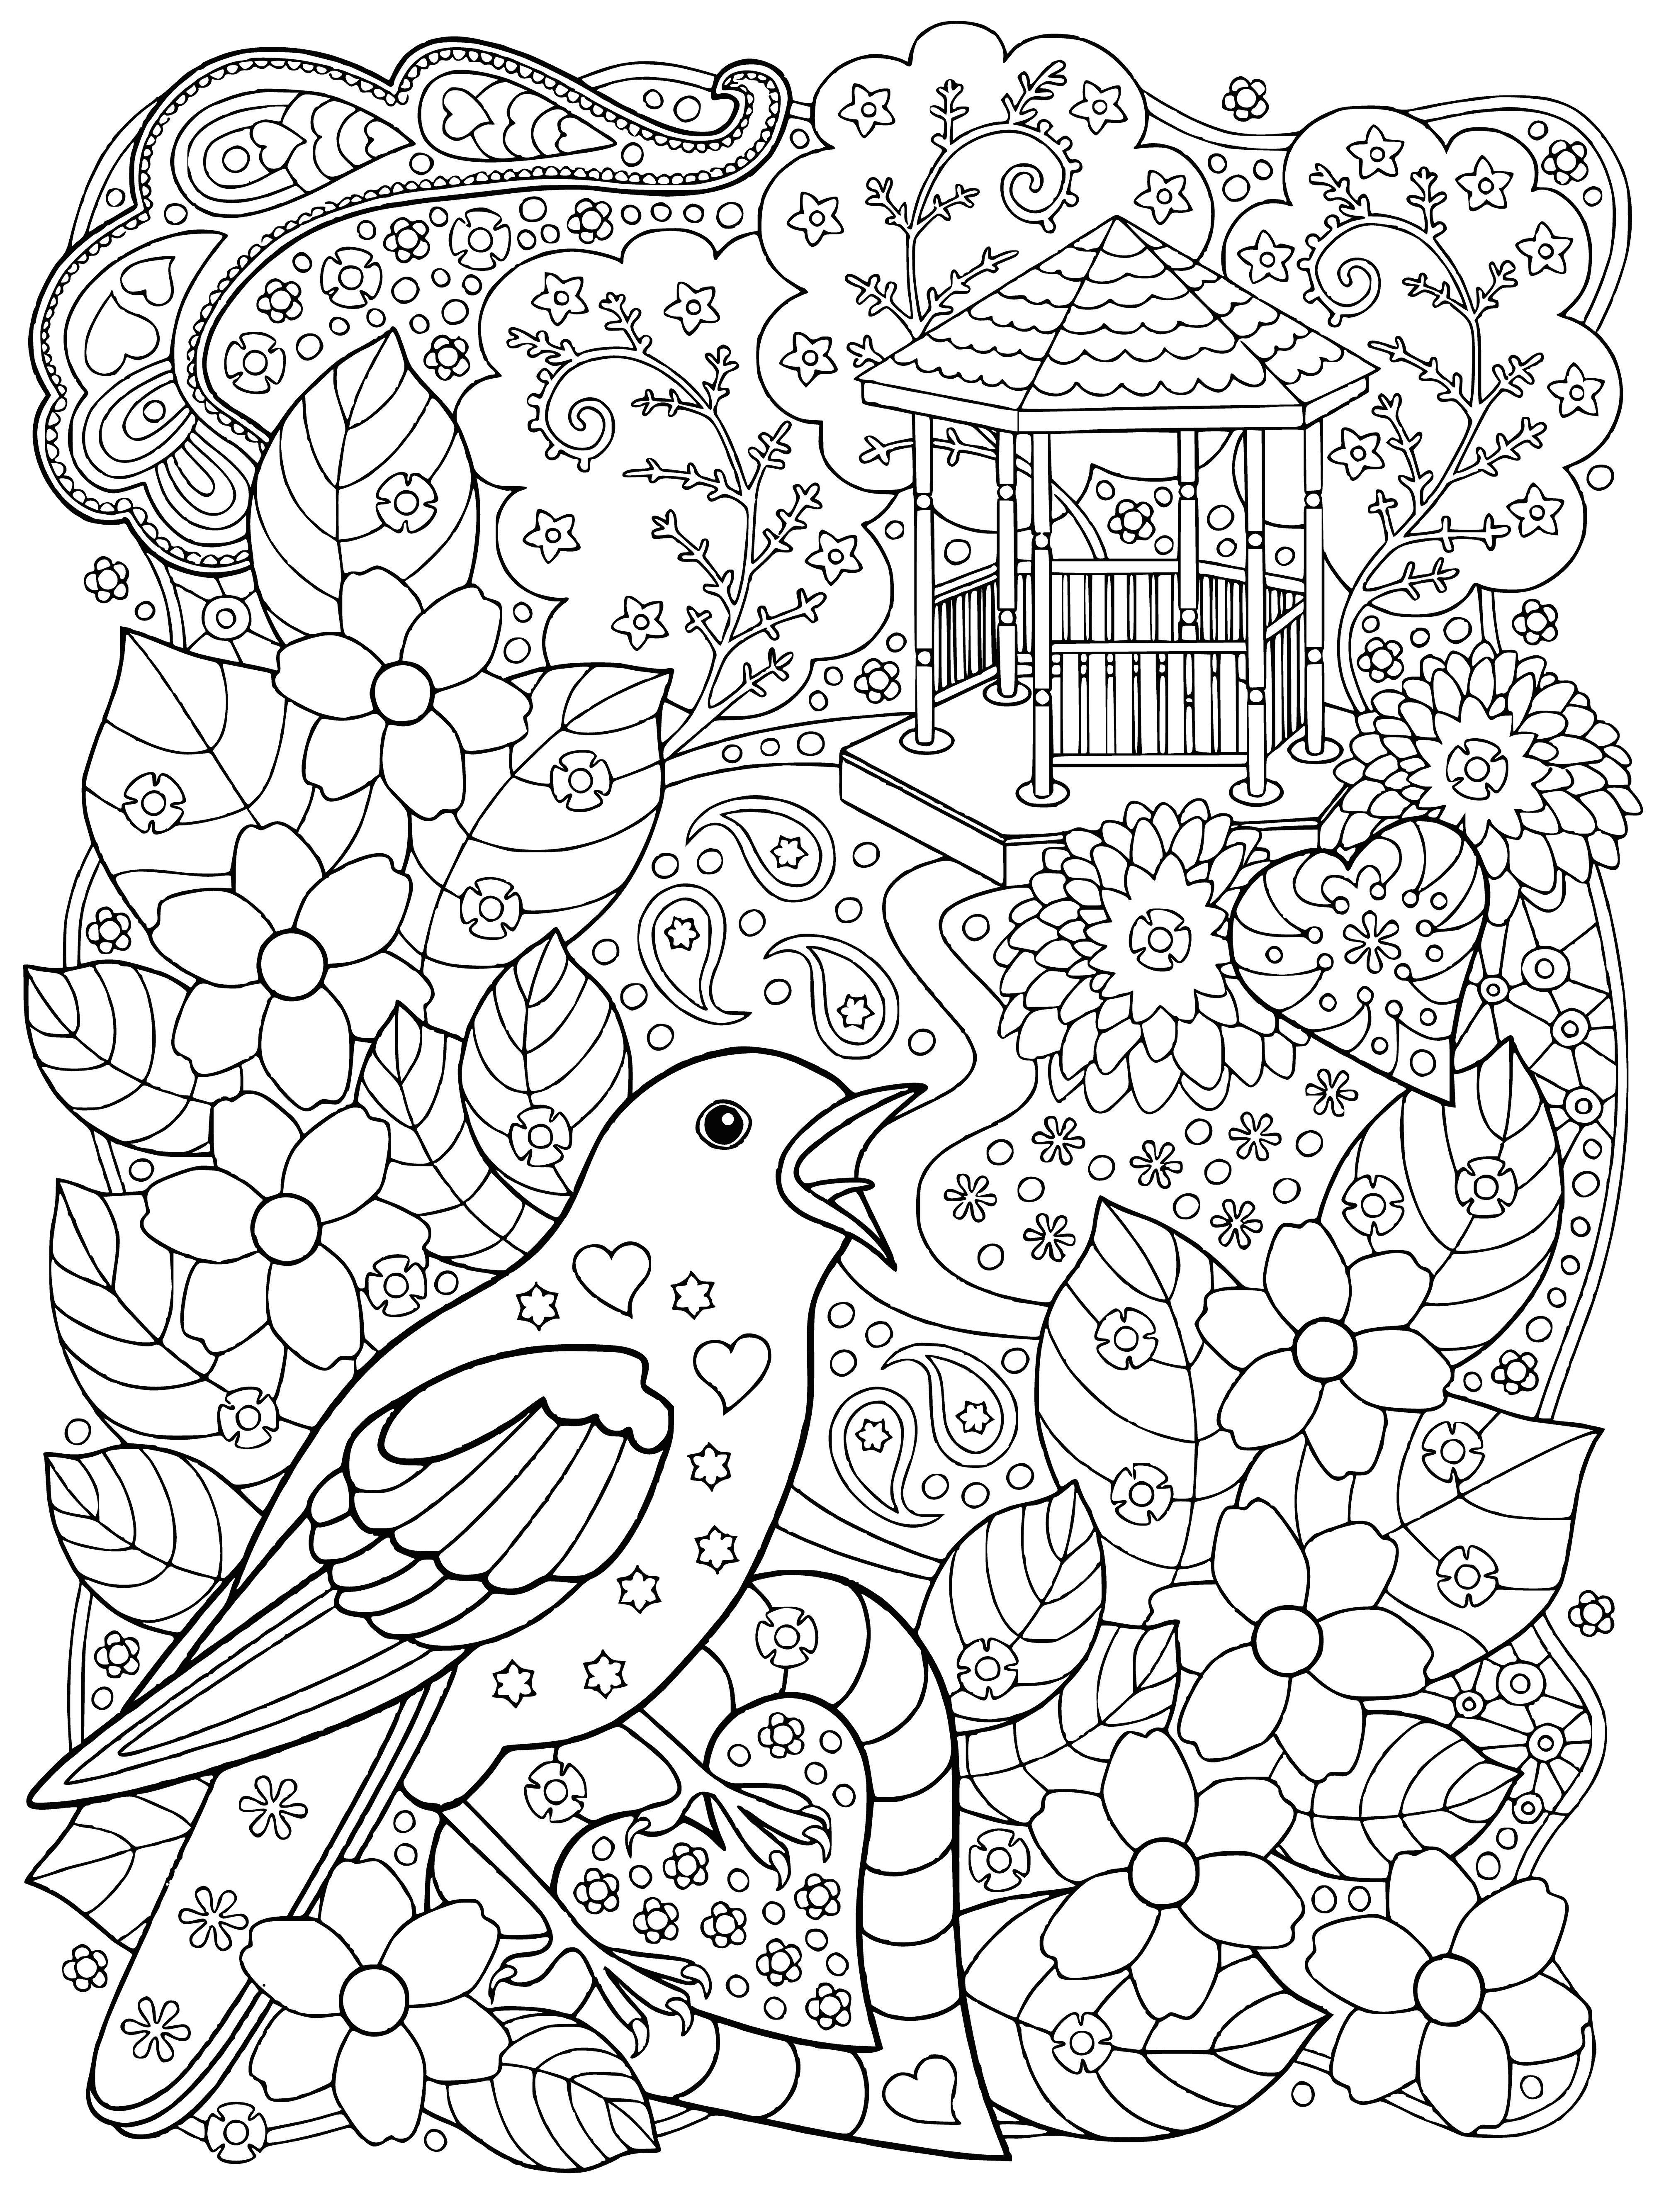 Bird and gazebo coloring page